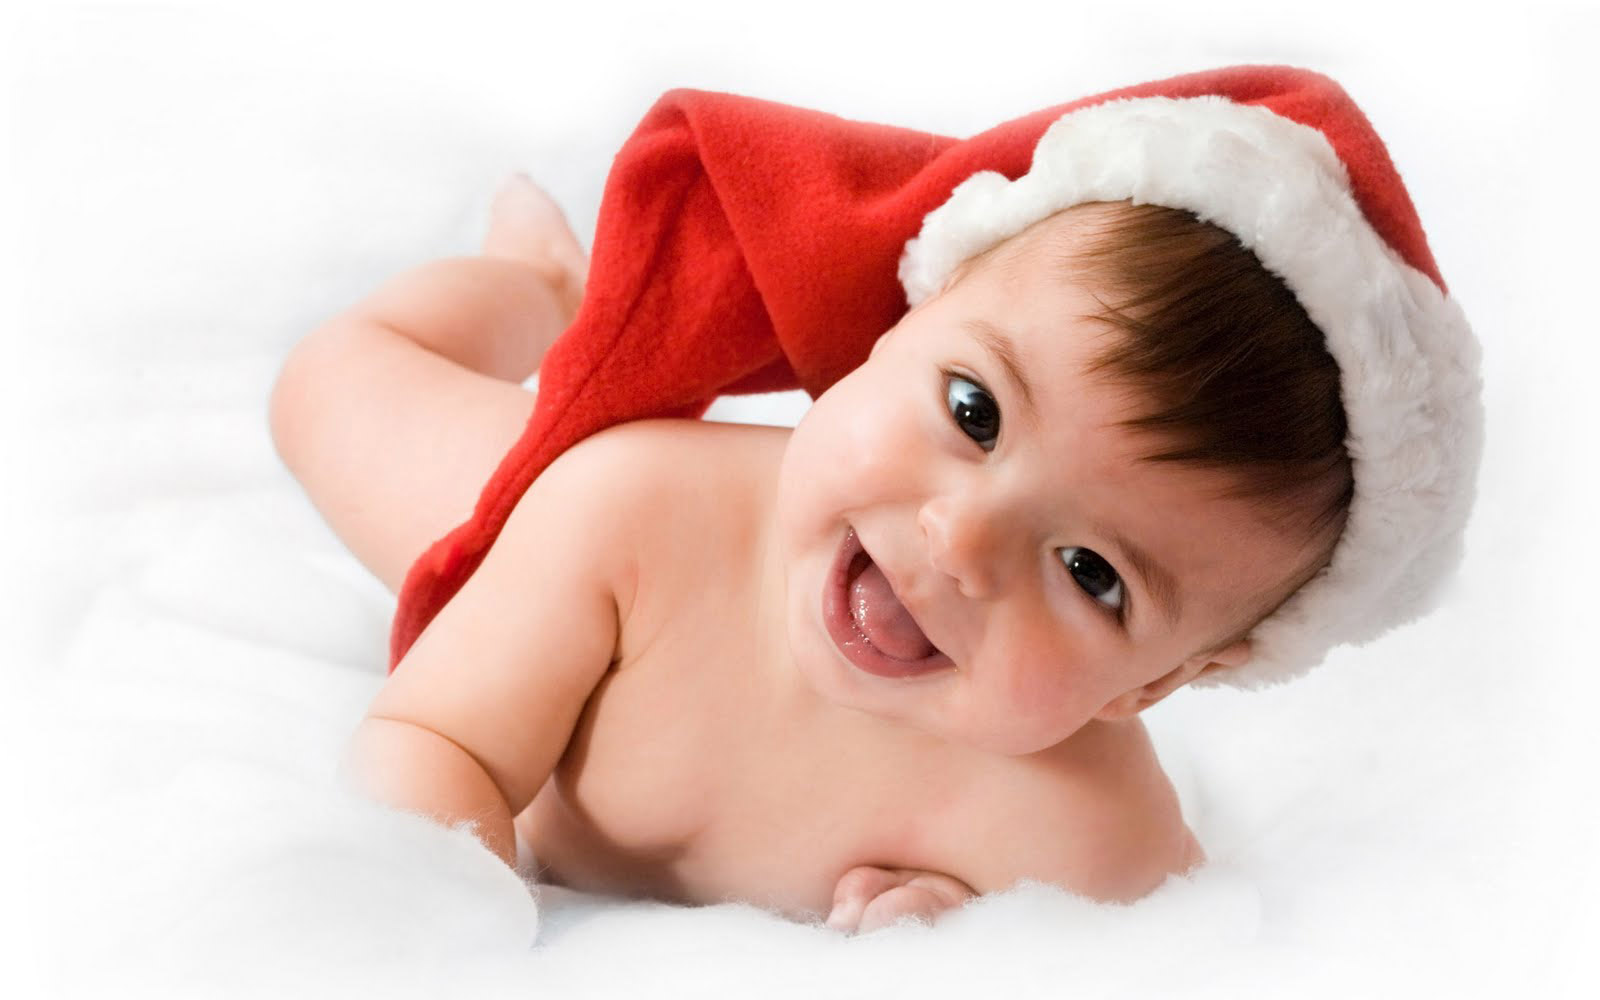 08 Laughing Baby HD Wallpapers for Desktop – Daily Backgrounds in HD